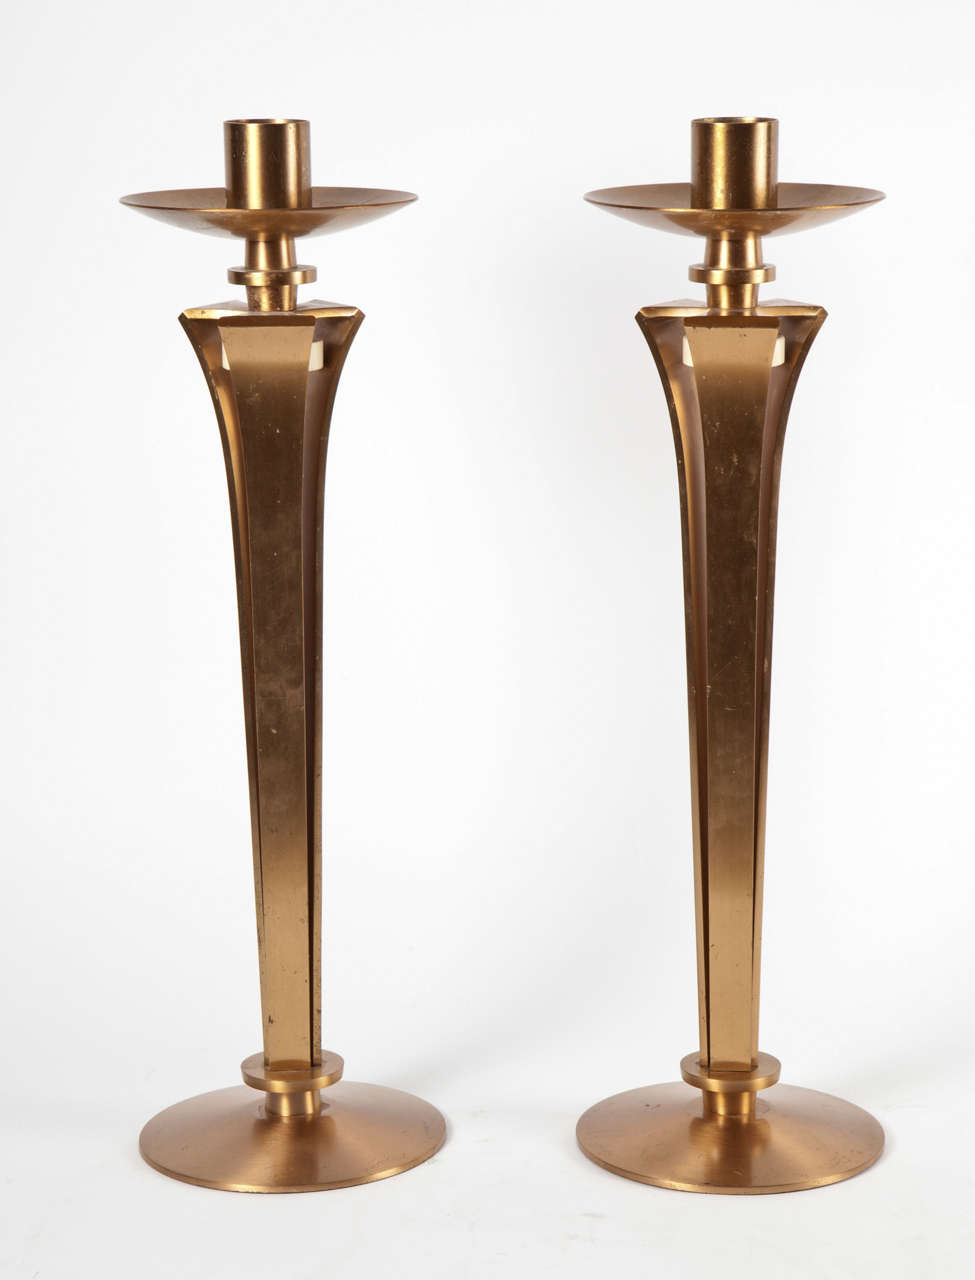 Pair of tall candleholder in bronze with 